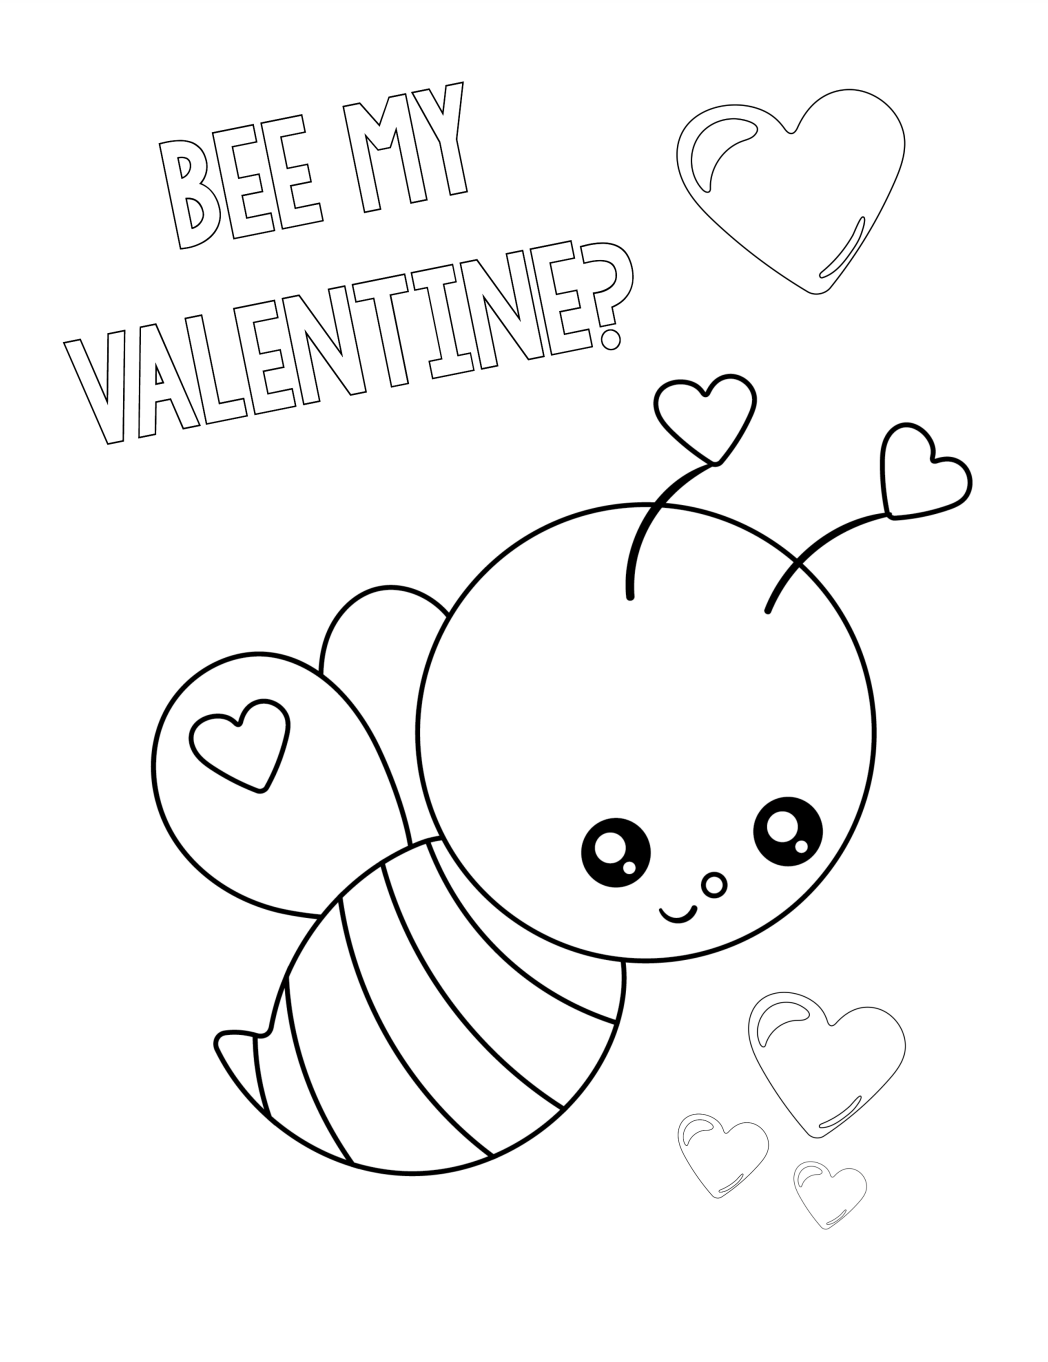 Cute Valentine's Day Coloring Pages for Kids - Crazy Little Projects